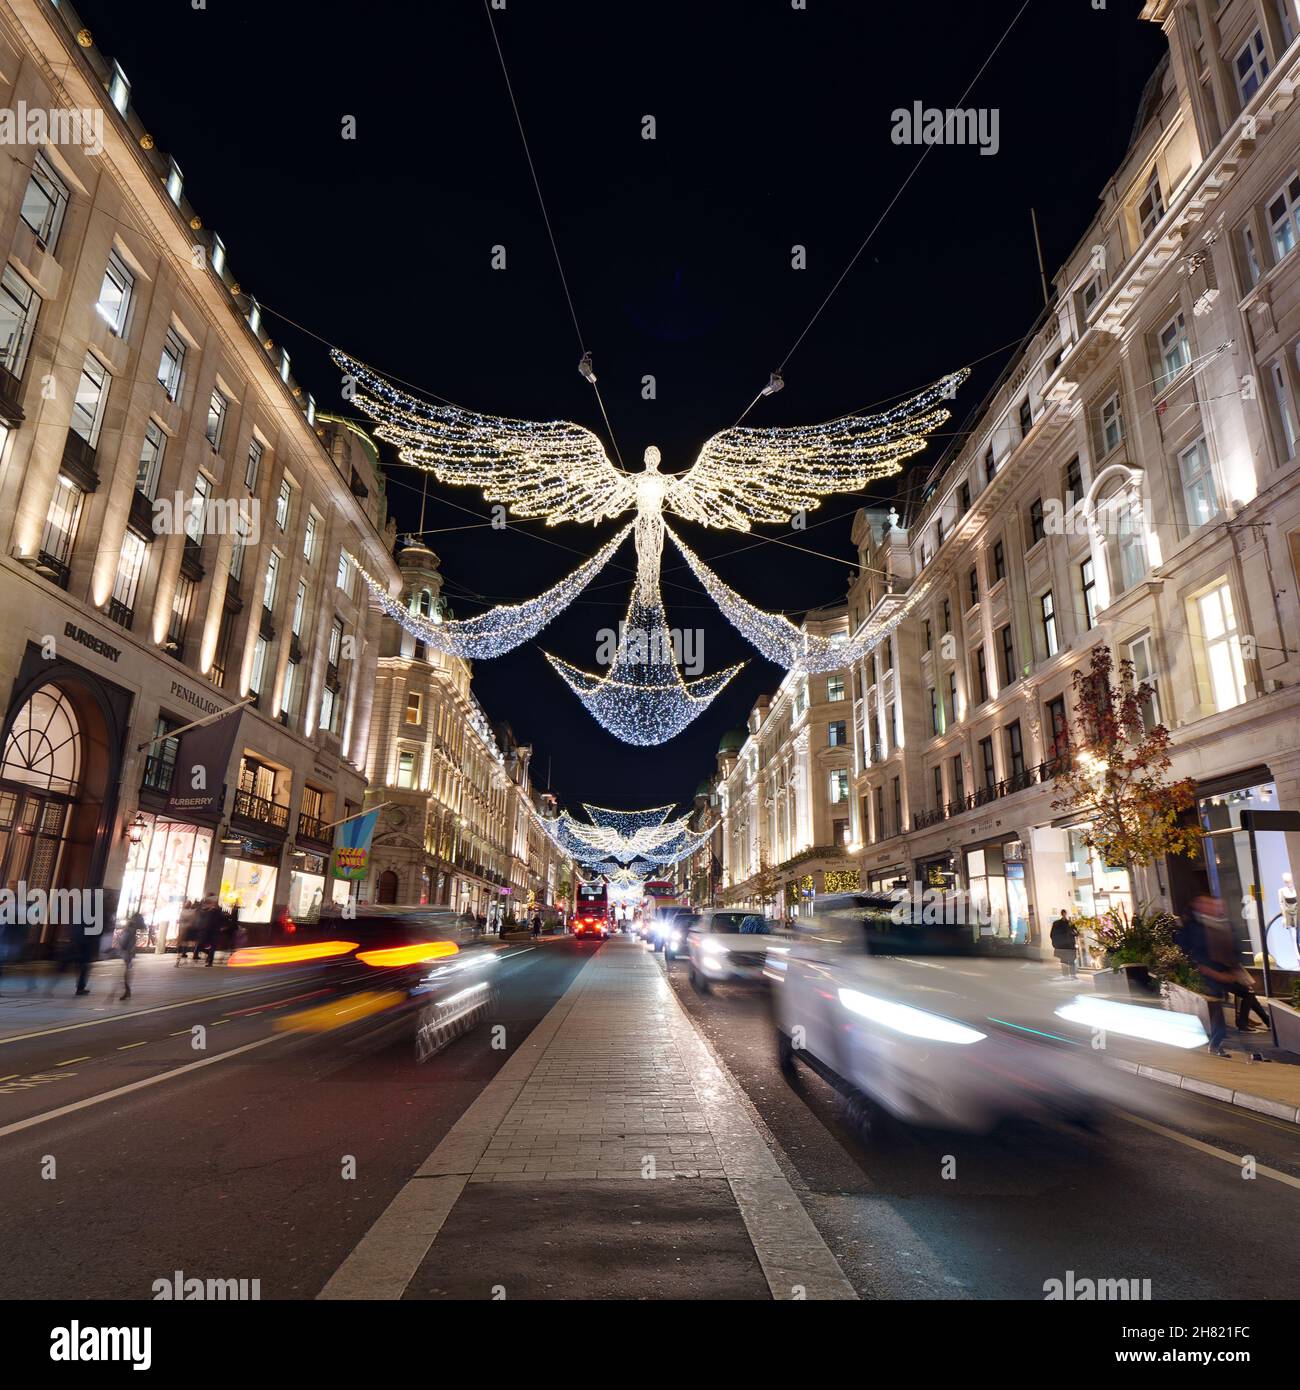 London, Greater London, England, November 23 2021: Spirits or Angels of Christmas in a festive Regent Street at night, Long Exposure. Stock Photo